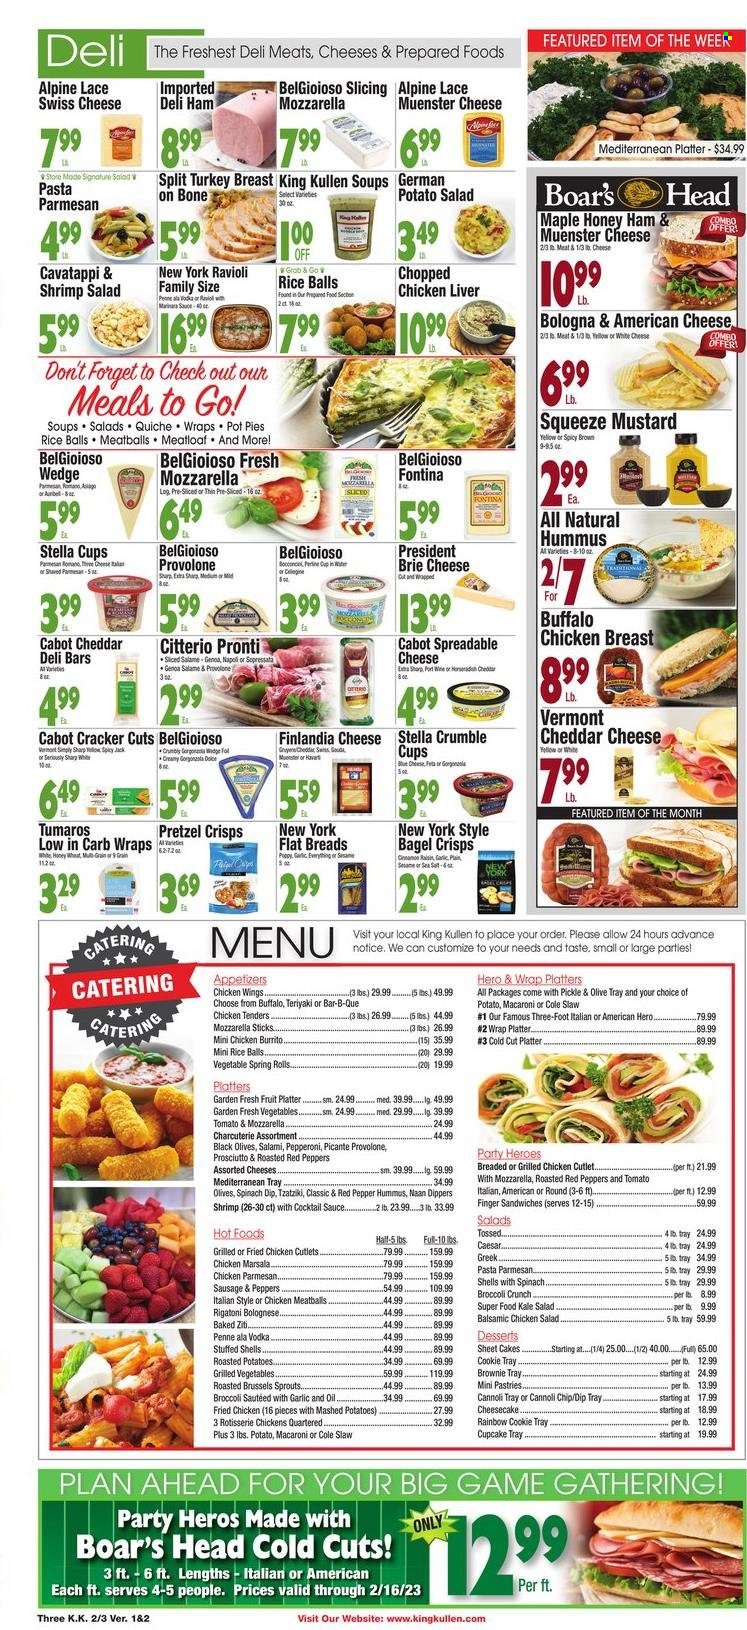 thumbnail - King Kullen Flyer - 02/03/2023 - 02/09/2023 - Sales products - cake, wraps, cupcake, pot pie, cheesecake, brownies, broccoli, kale, red peppers, shrimps, mashed potatoes, ravioli, chicken tenders, meatballs, sandwich, macaroni, pasta, fried chicken, spring rolls, meatloaf, burrito, baked ziti, salami, ham, prosciutto, bologna sausage, sausage, pepperoni, tzatziki, hummus, potato salad, chicken salad, american cheese, asiago, Fontina, swiss cheese, cheddar, cheese, brie, Münster cheese, Président, Provolone, spinach dip, chicken wings, rice balls, quiche, crackers, bagel crisps, pretzel crisps, olives, penne, cinnamon, cocktail sauce, mustard, oil, vodka, turkey breast. Page 3.